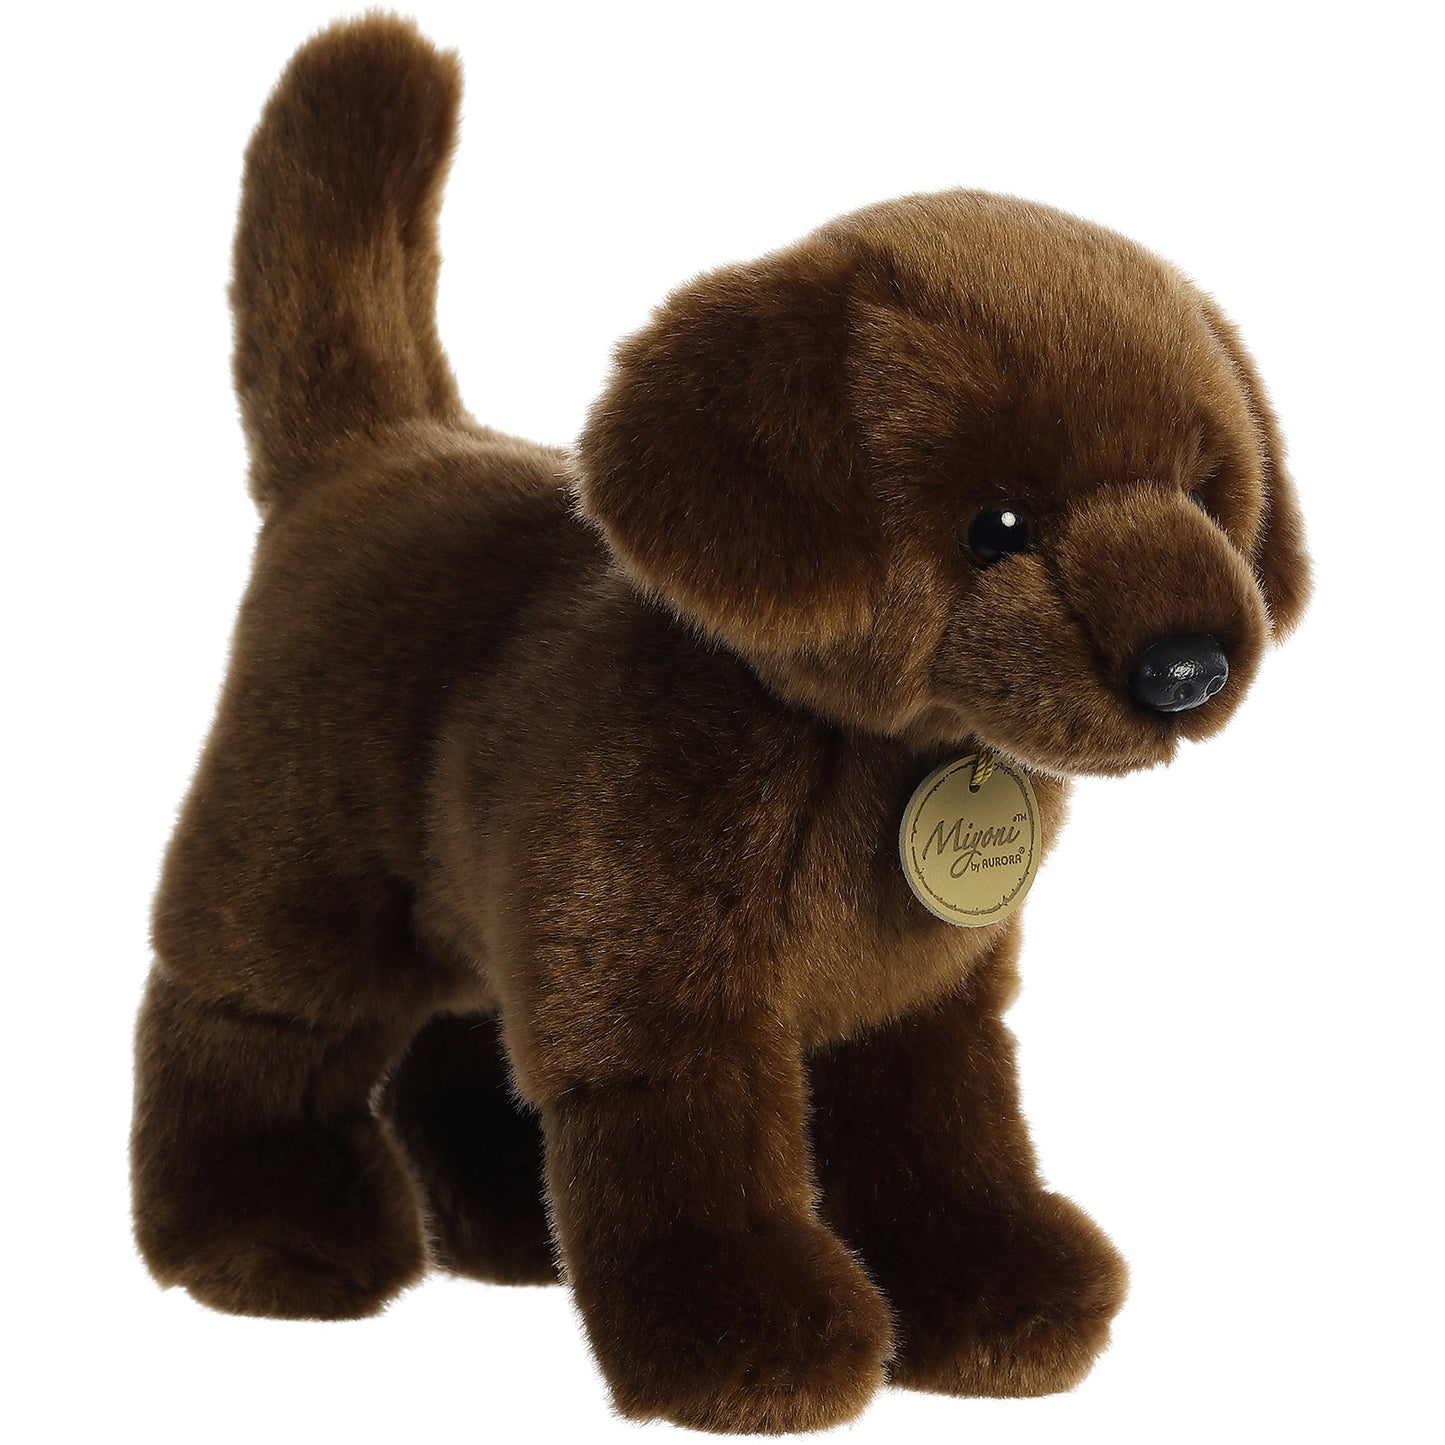 Load image into Gallery viewer, Chocolate Labrador Puppy Dog 10 inch
